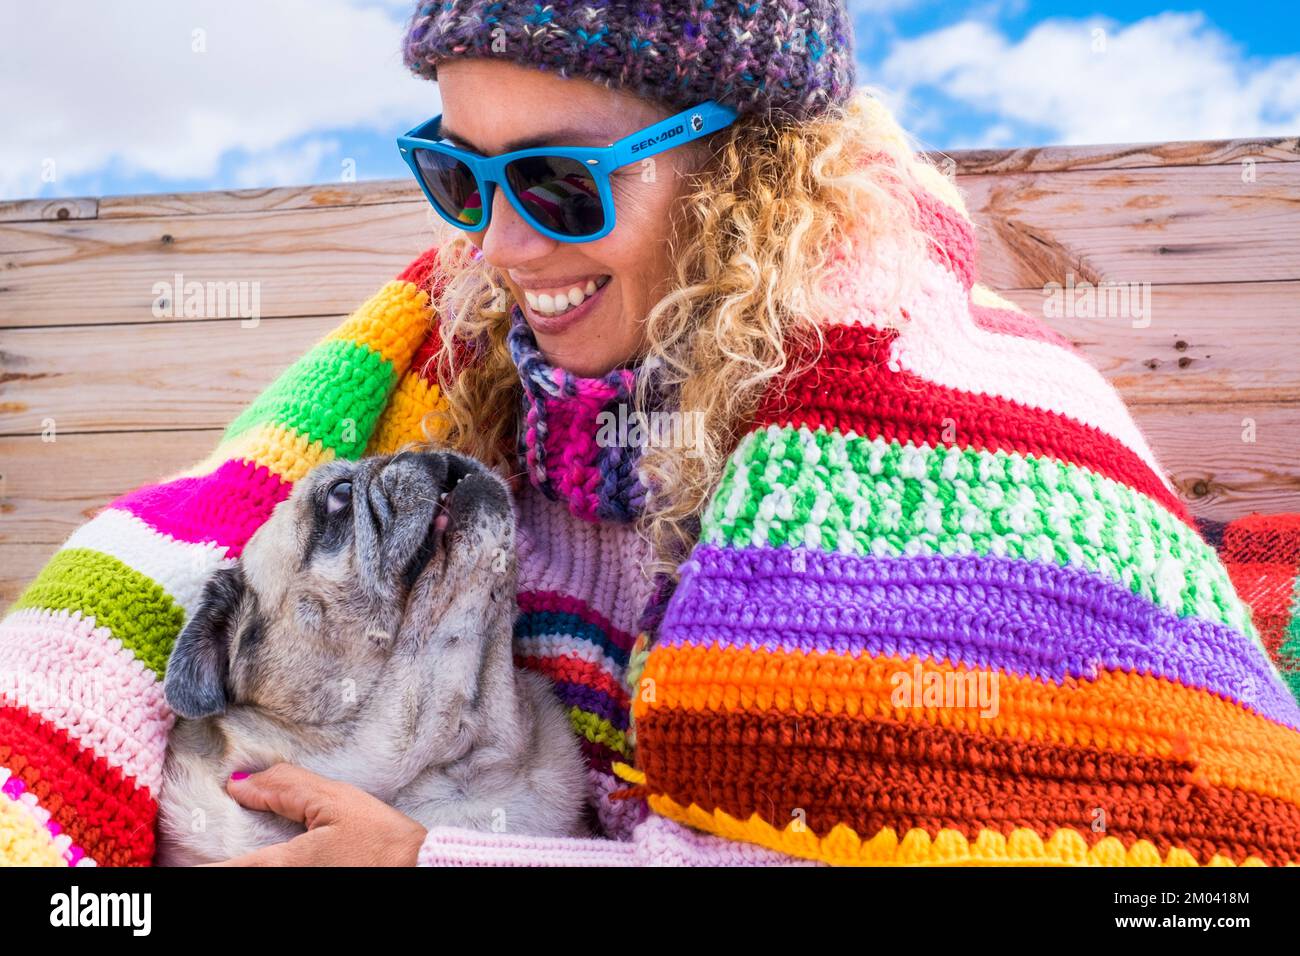 One happy woman smiling with her best friend companion dog pug sitting near her. Winter outdoor leisure activity with people in friendship with animal Stock Photo